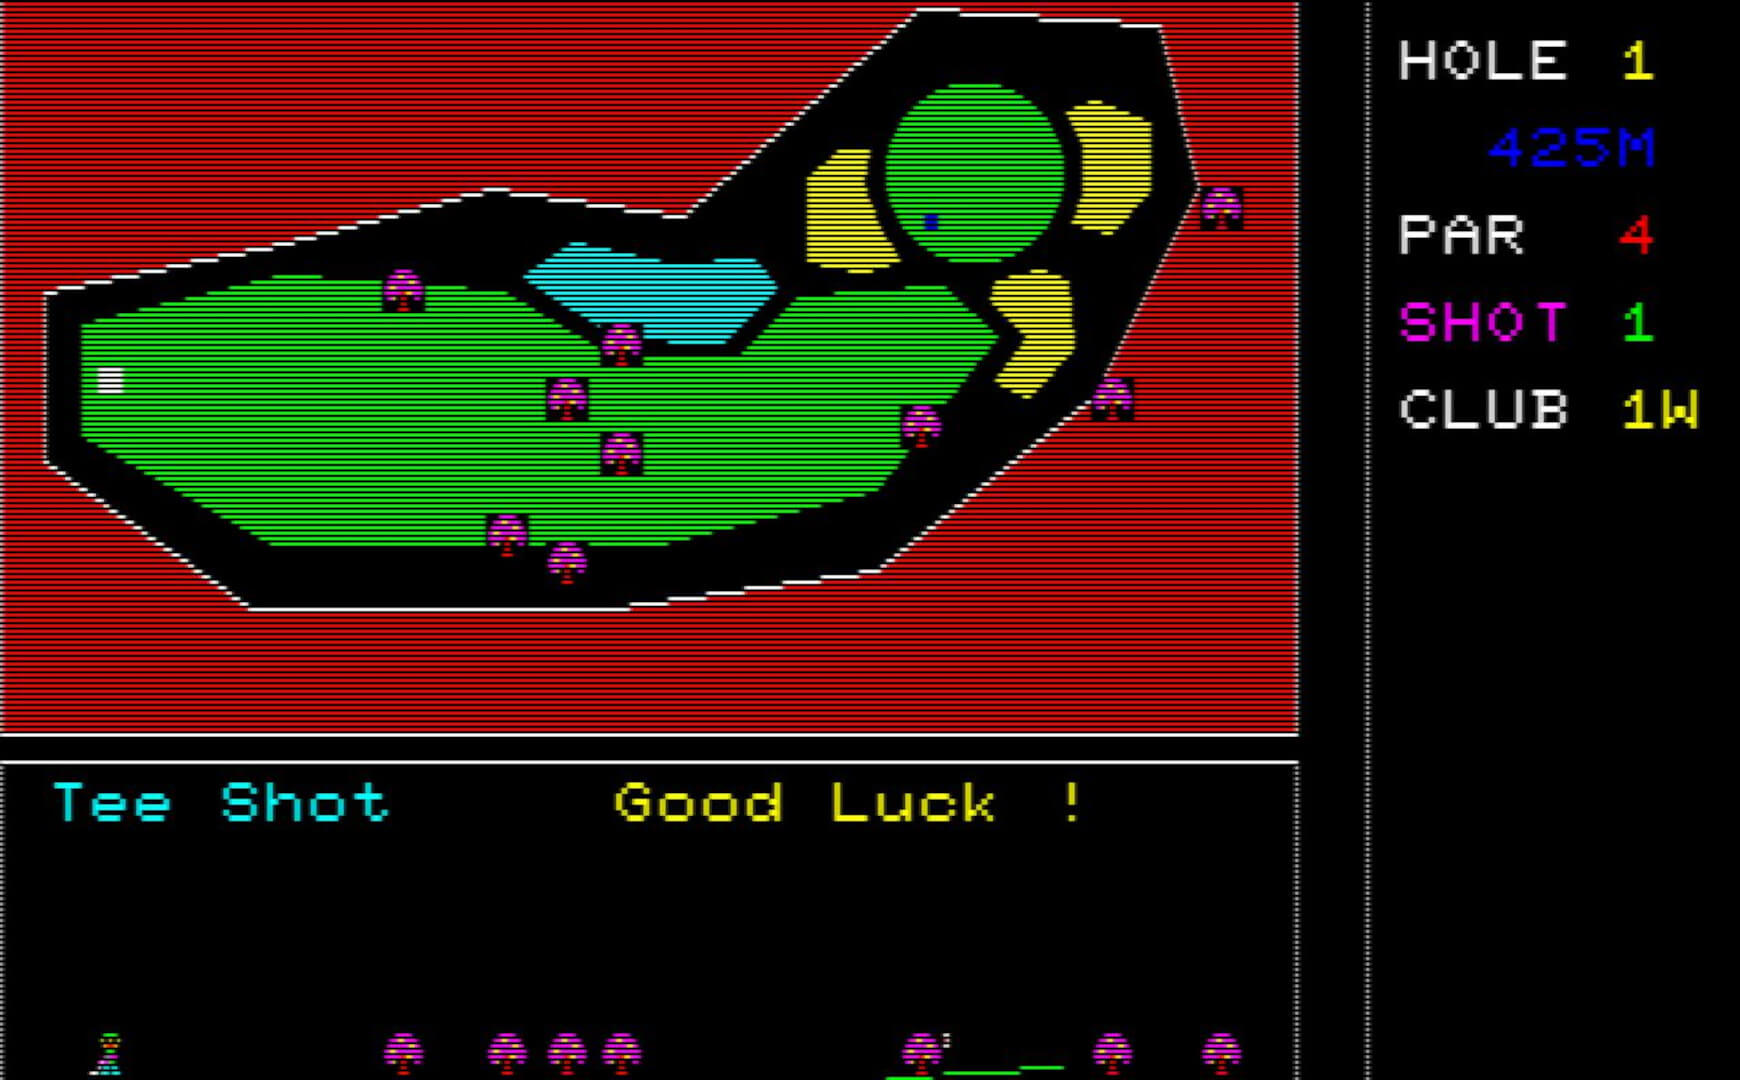 A shot of the early Falcom classic game Computer The Golf